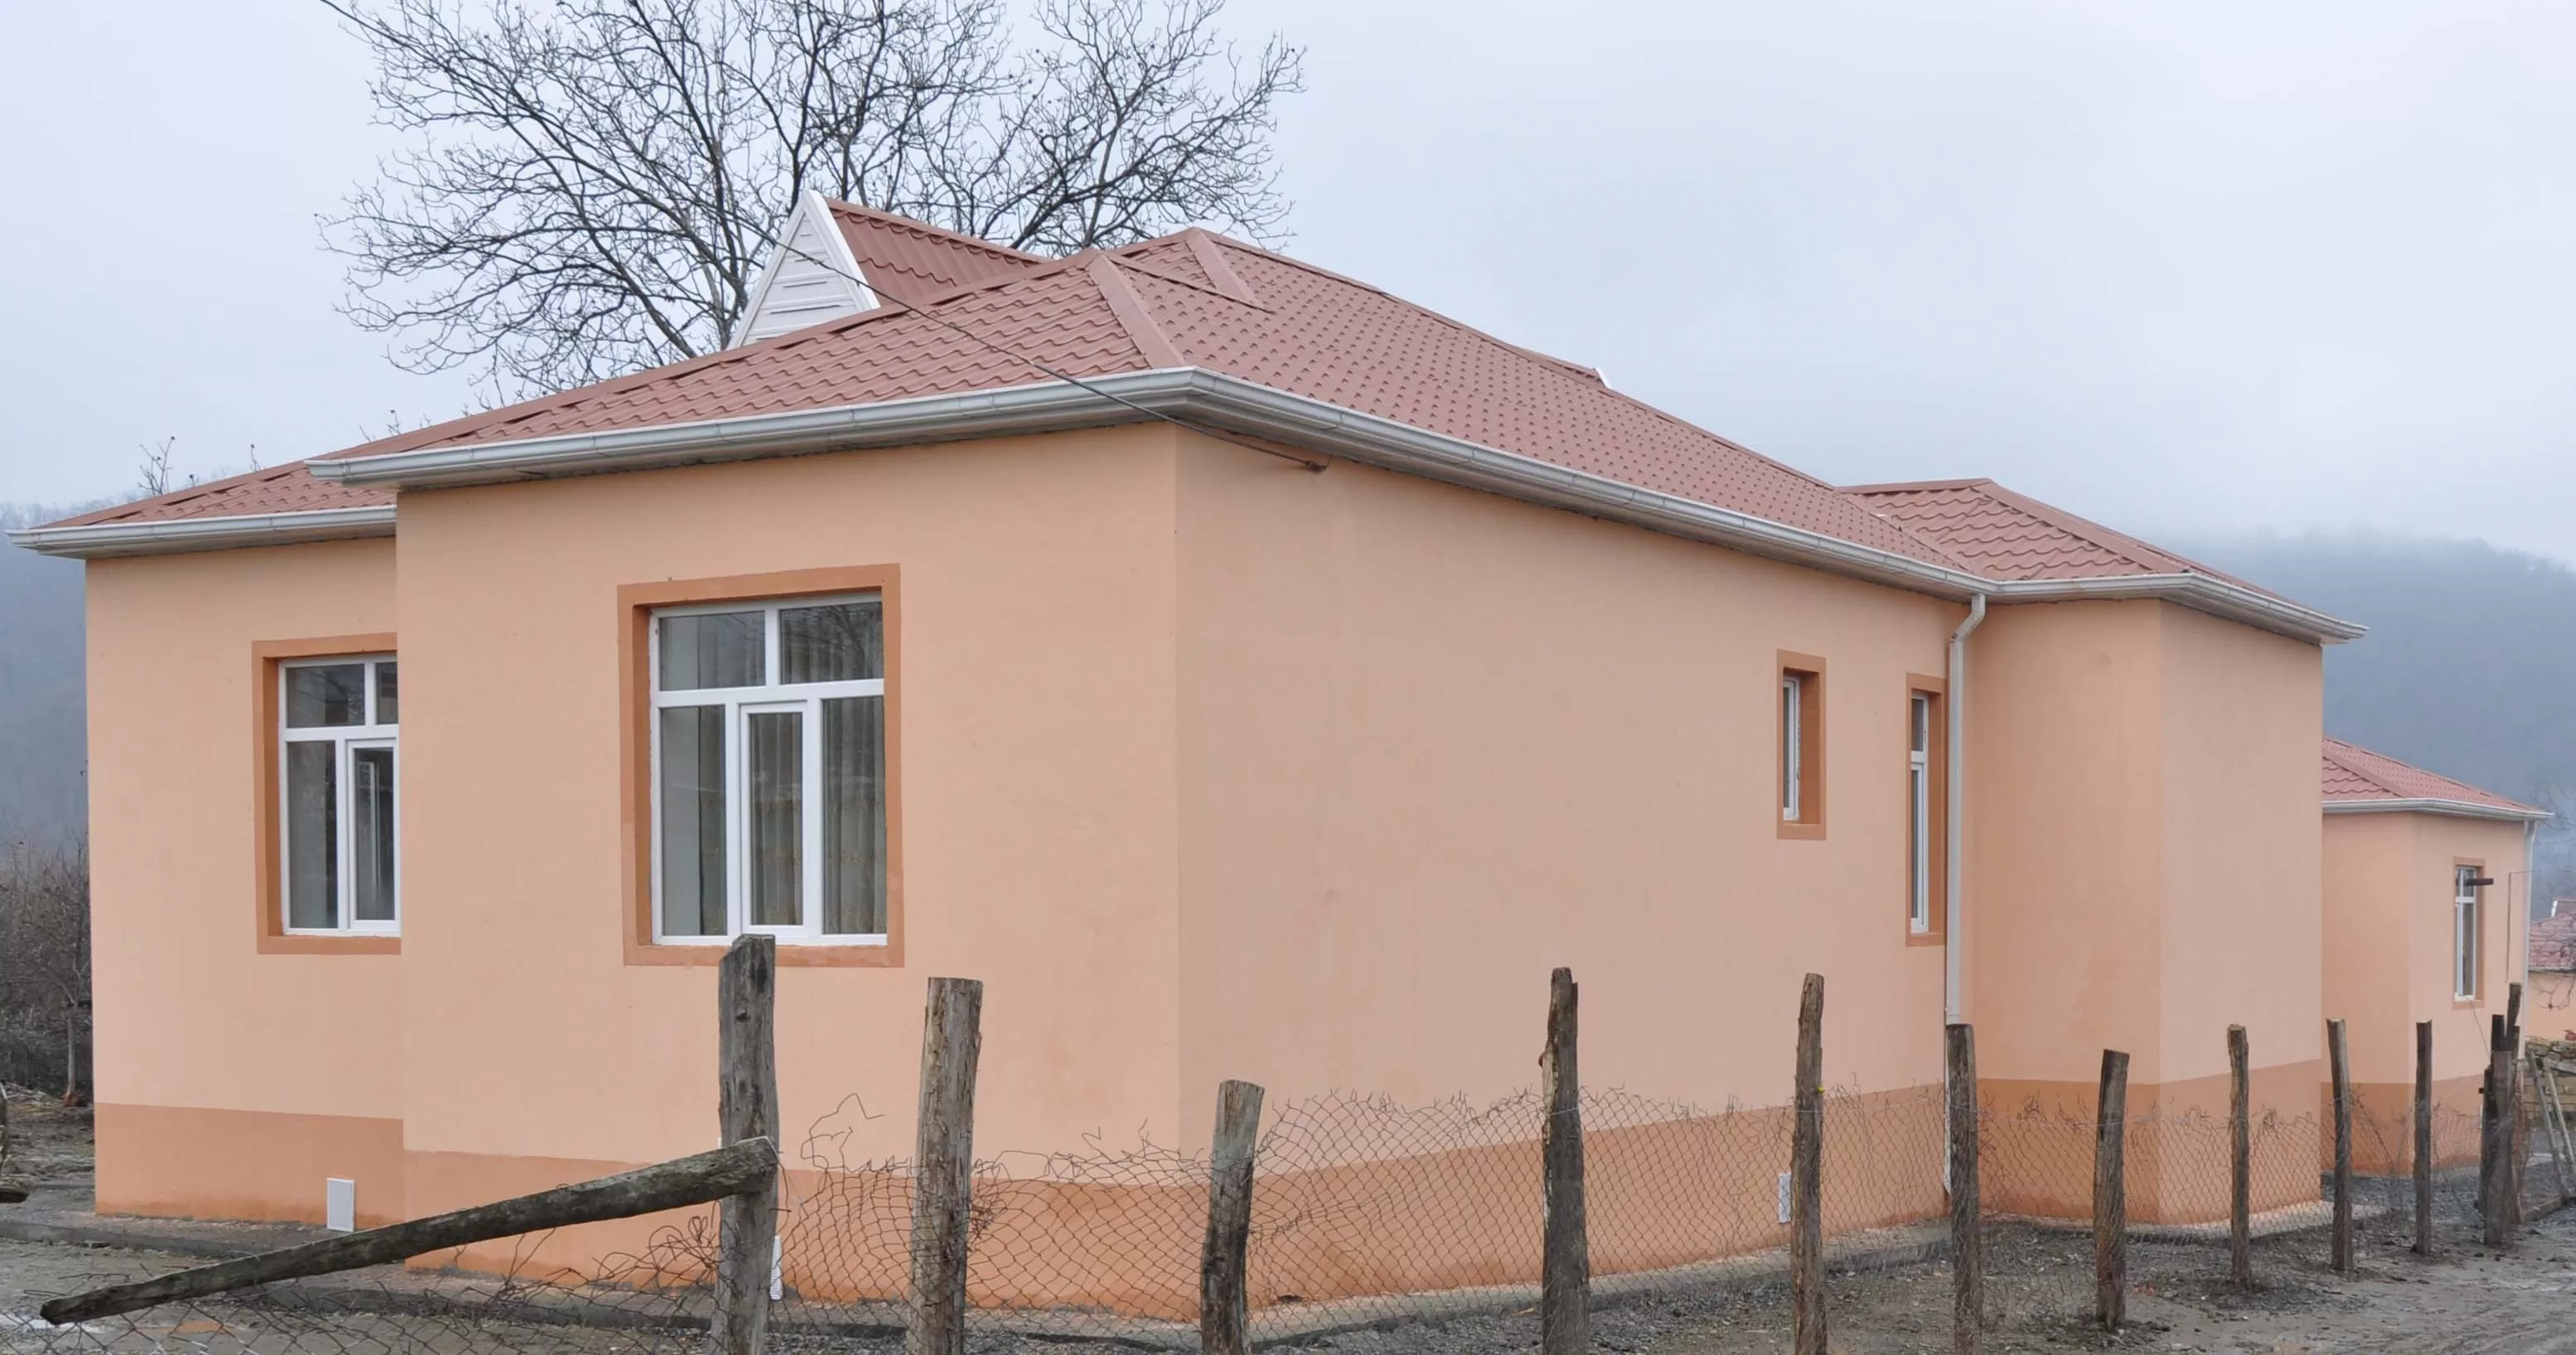 Construction and repair of 205 one- and two-storey houses